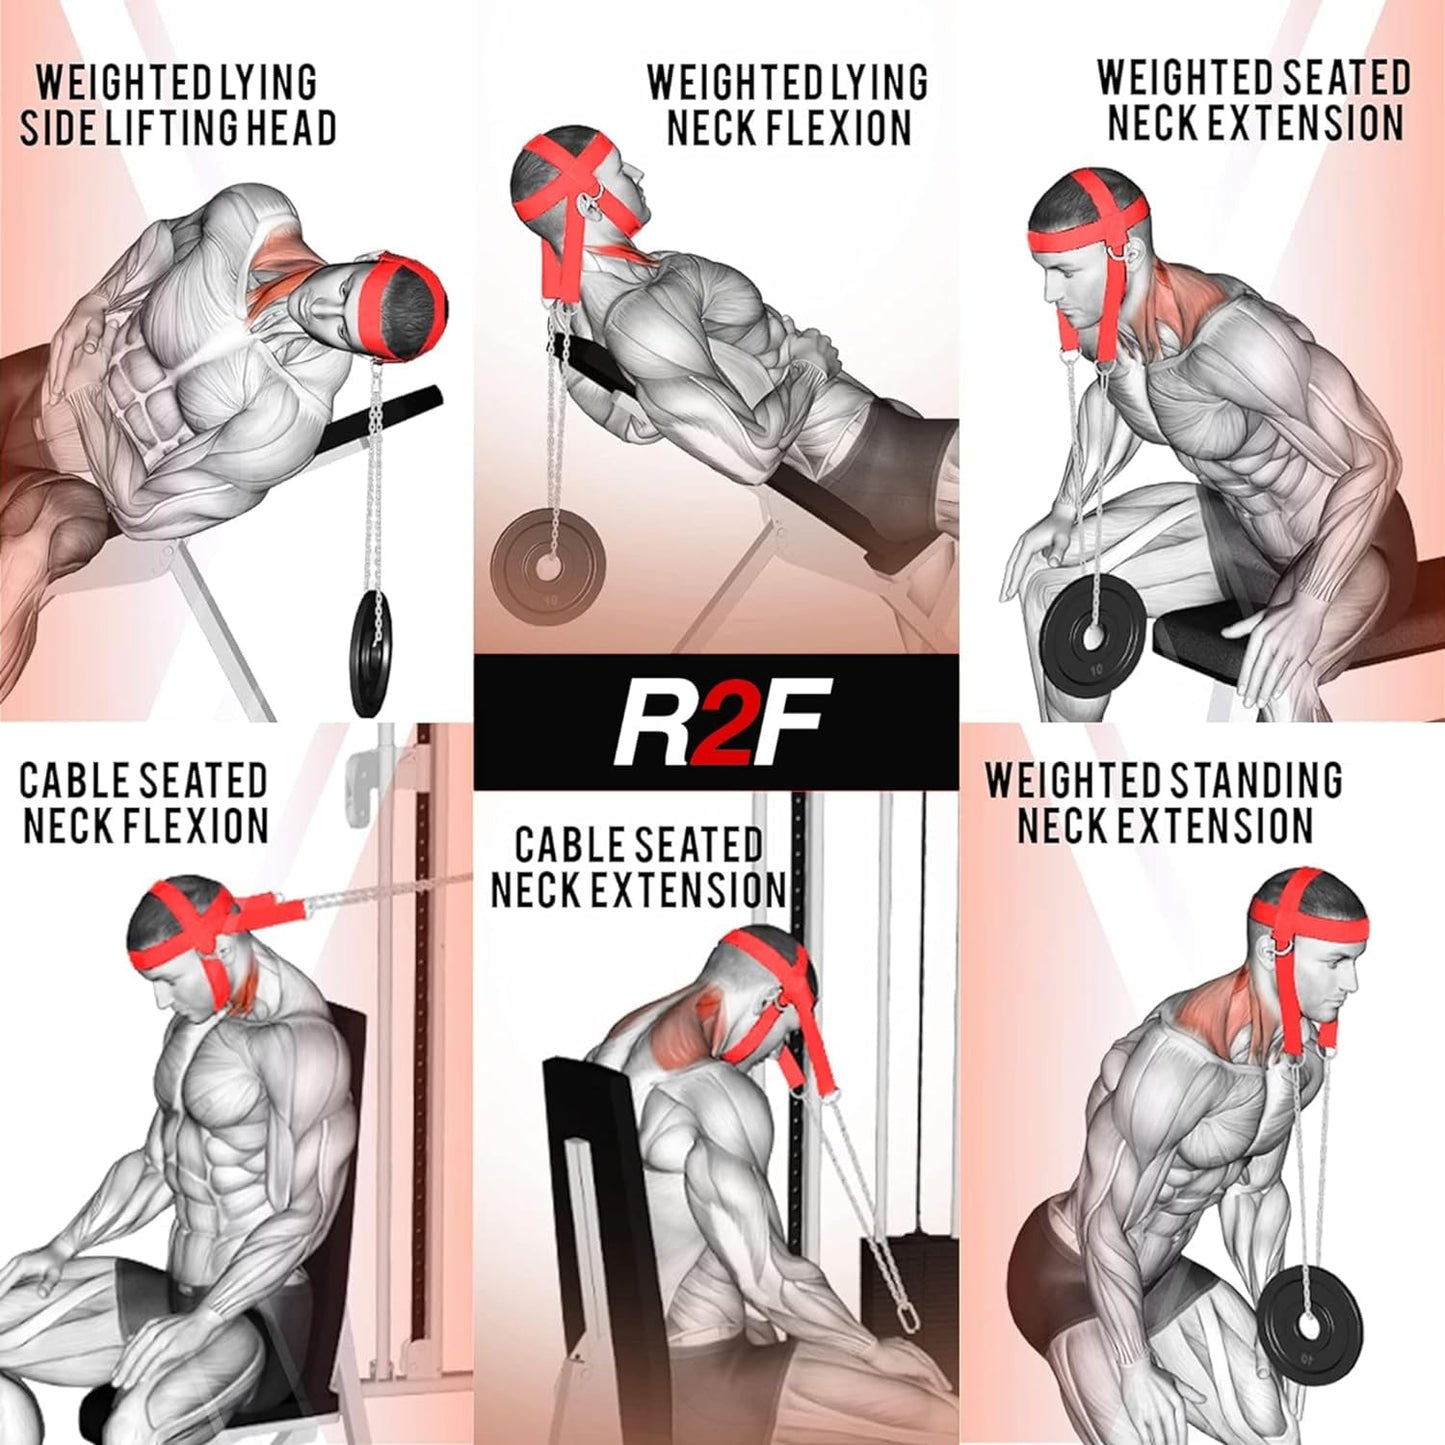 Enhance your neck strength with R2F Sports' neck harness weight lifting training. Our specialized equipment and training techniques are designed to help you build a strong and resilient neck. Improve your overall athletic performance and reduce the risk of injury with our effective neck training program.